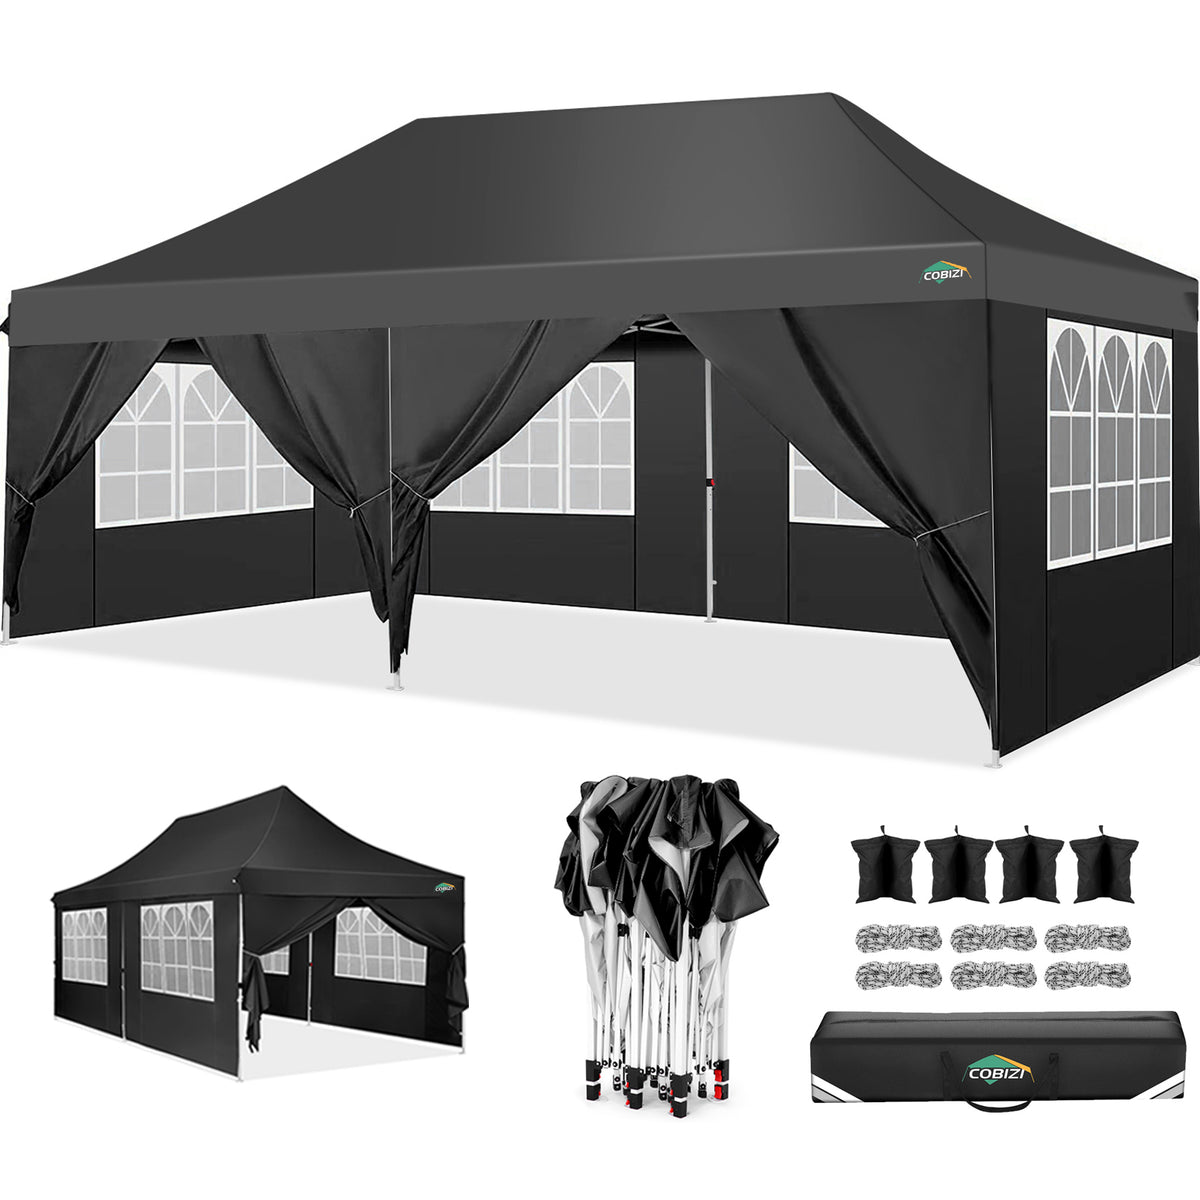 COBIZI 10'x20' Pop up Canopy Tent with 6 Removable Sidewalls, Instant Outdoor Canopy Shelter with Upgrade Raised Roof and Carry Bag